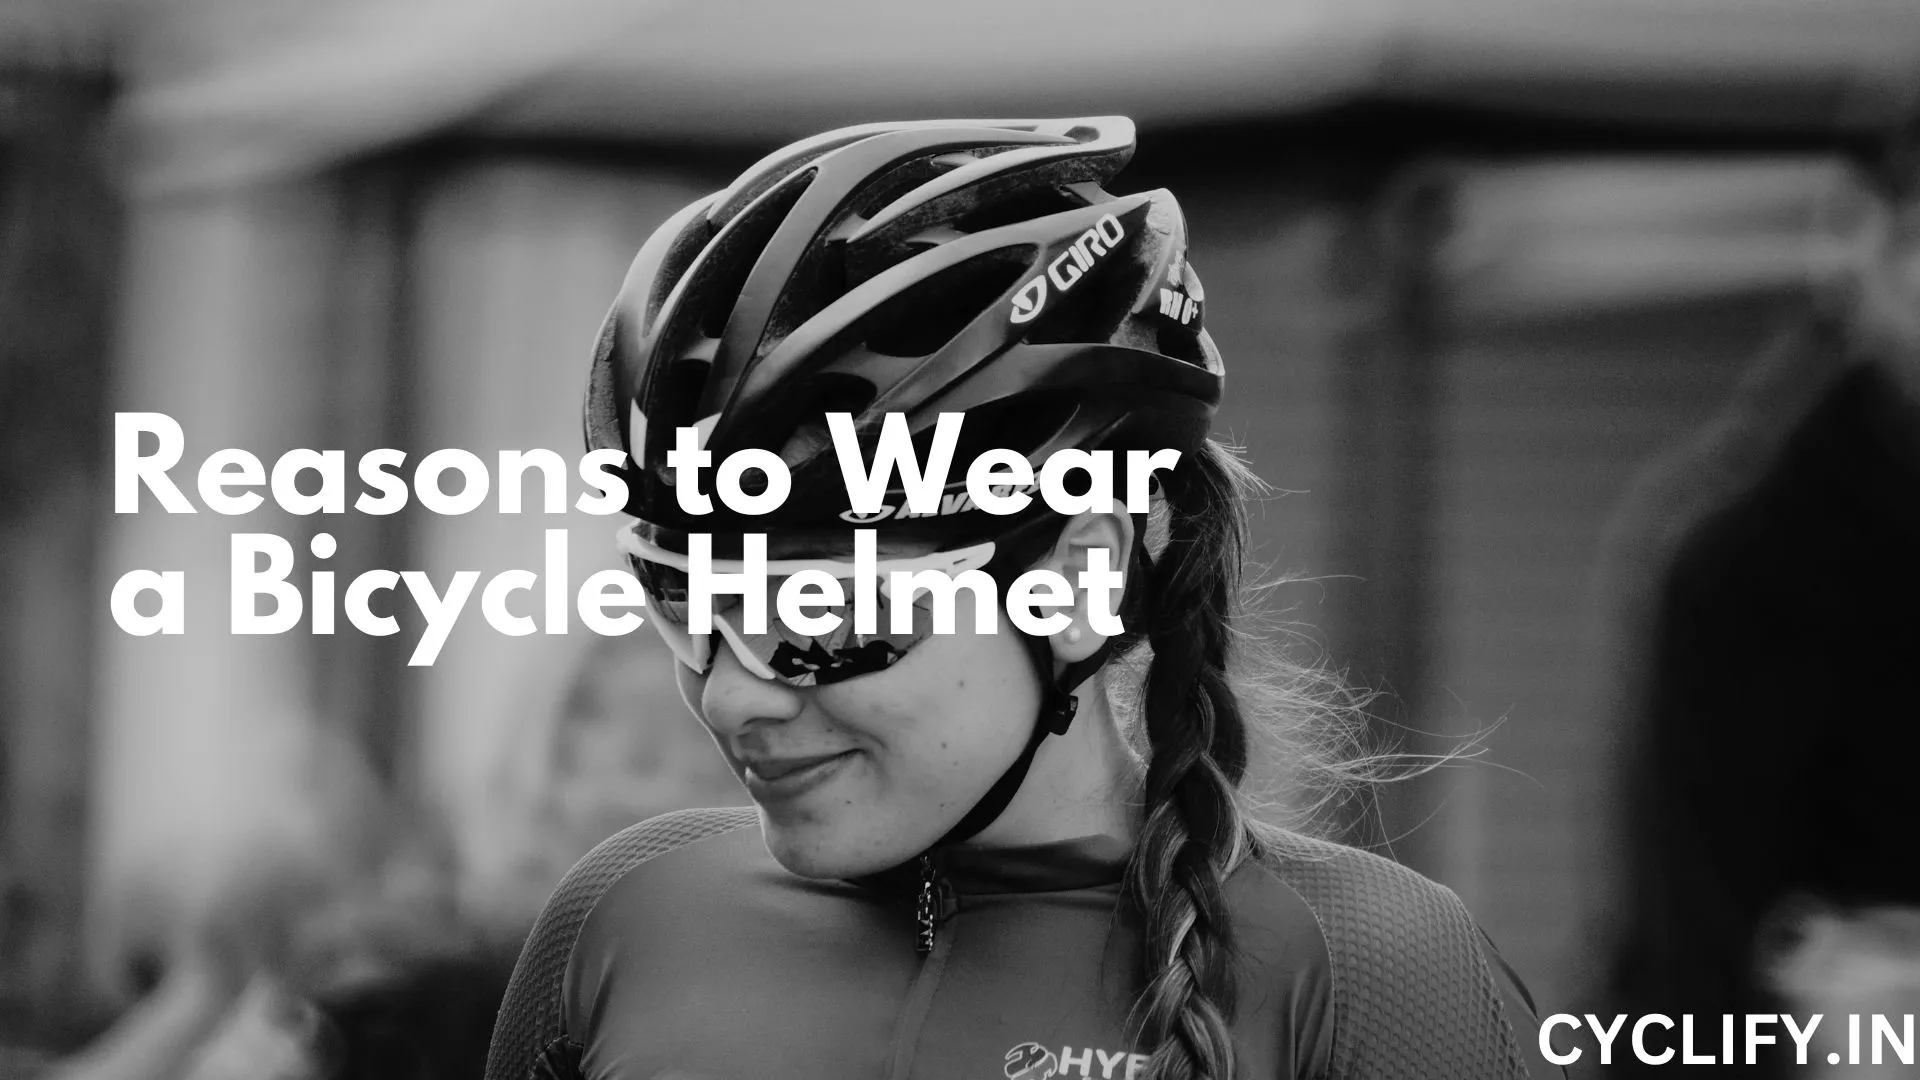 Reasons to Wear a Bicycle Helmet While Cycling